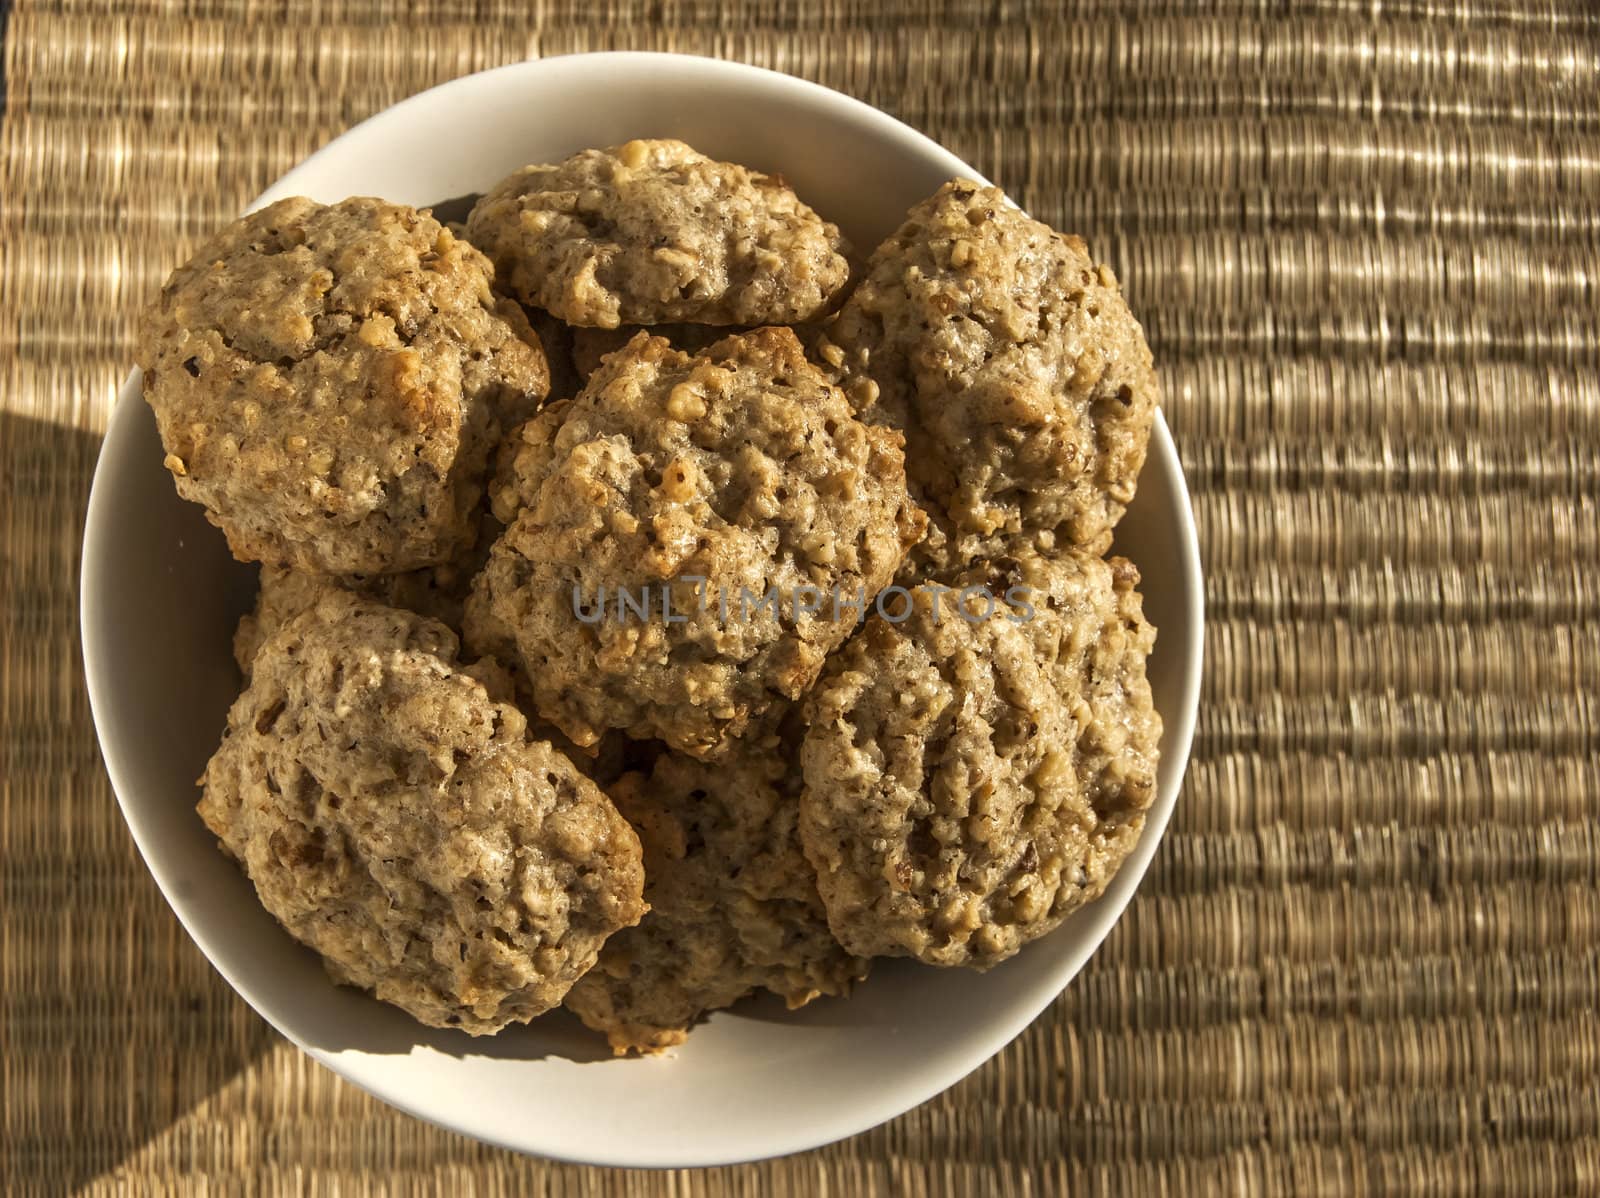 Homemade oatmeal cookies in bowl on reed mat closeup